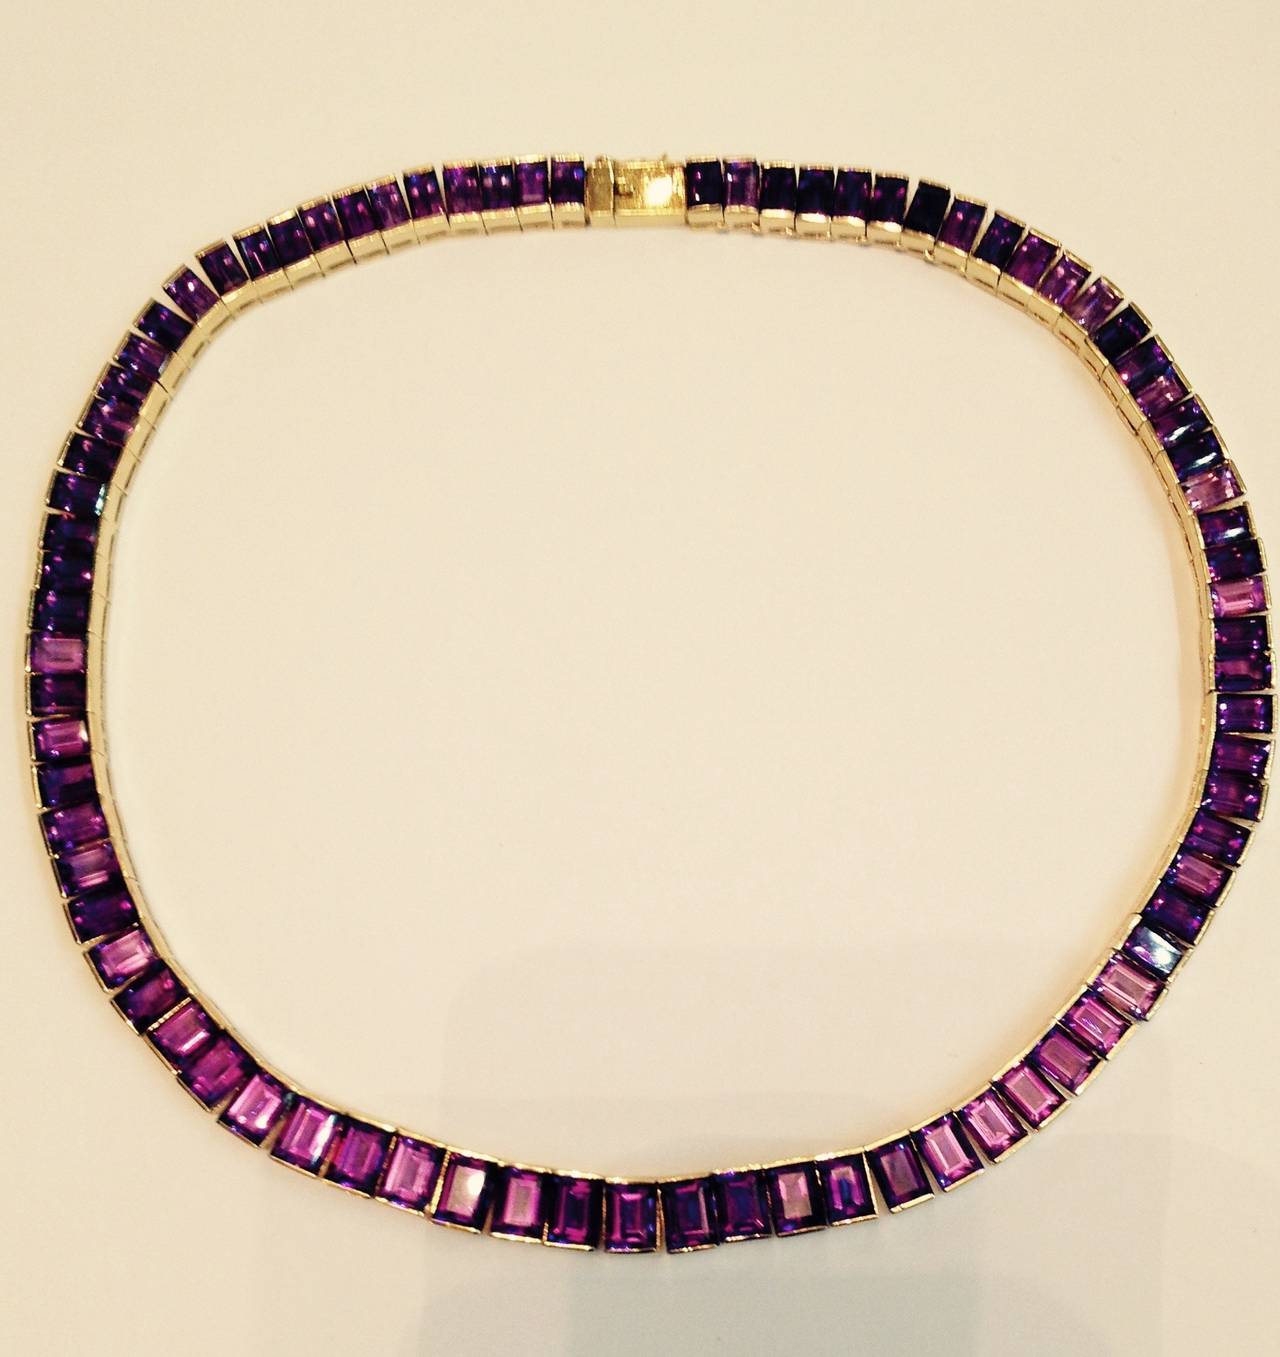 14kt yellow gold intense and beautiful color amethyst straightline necklace consisting of {90} Baguette cut high quality amethysts very flexible and beautifully made 15 and 1/2  inches wearable glissteneing irridescent stones circa 1960's european